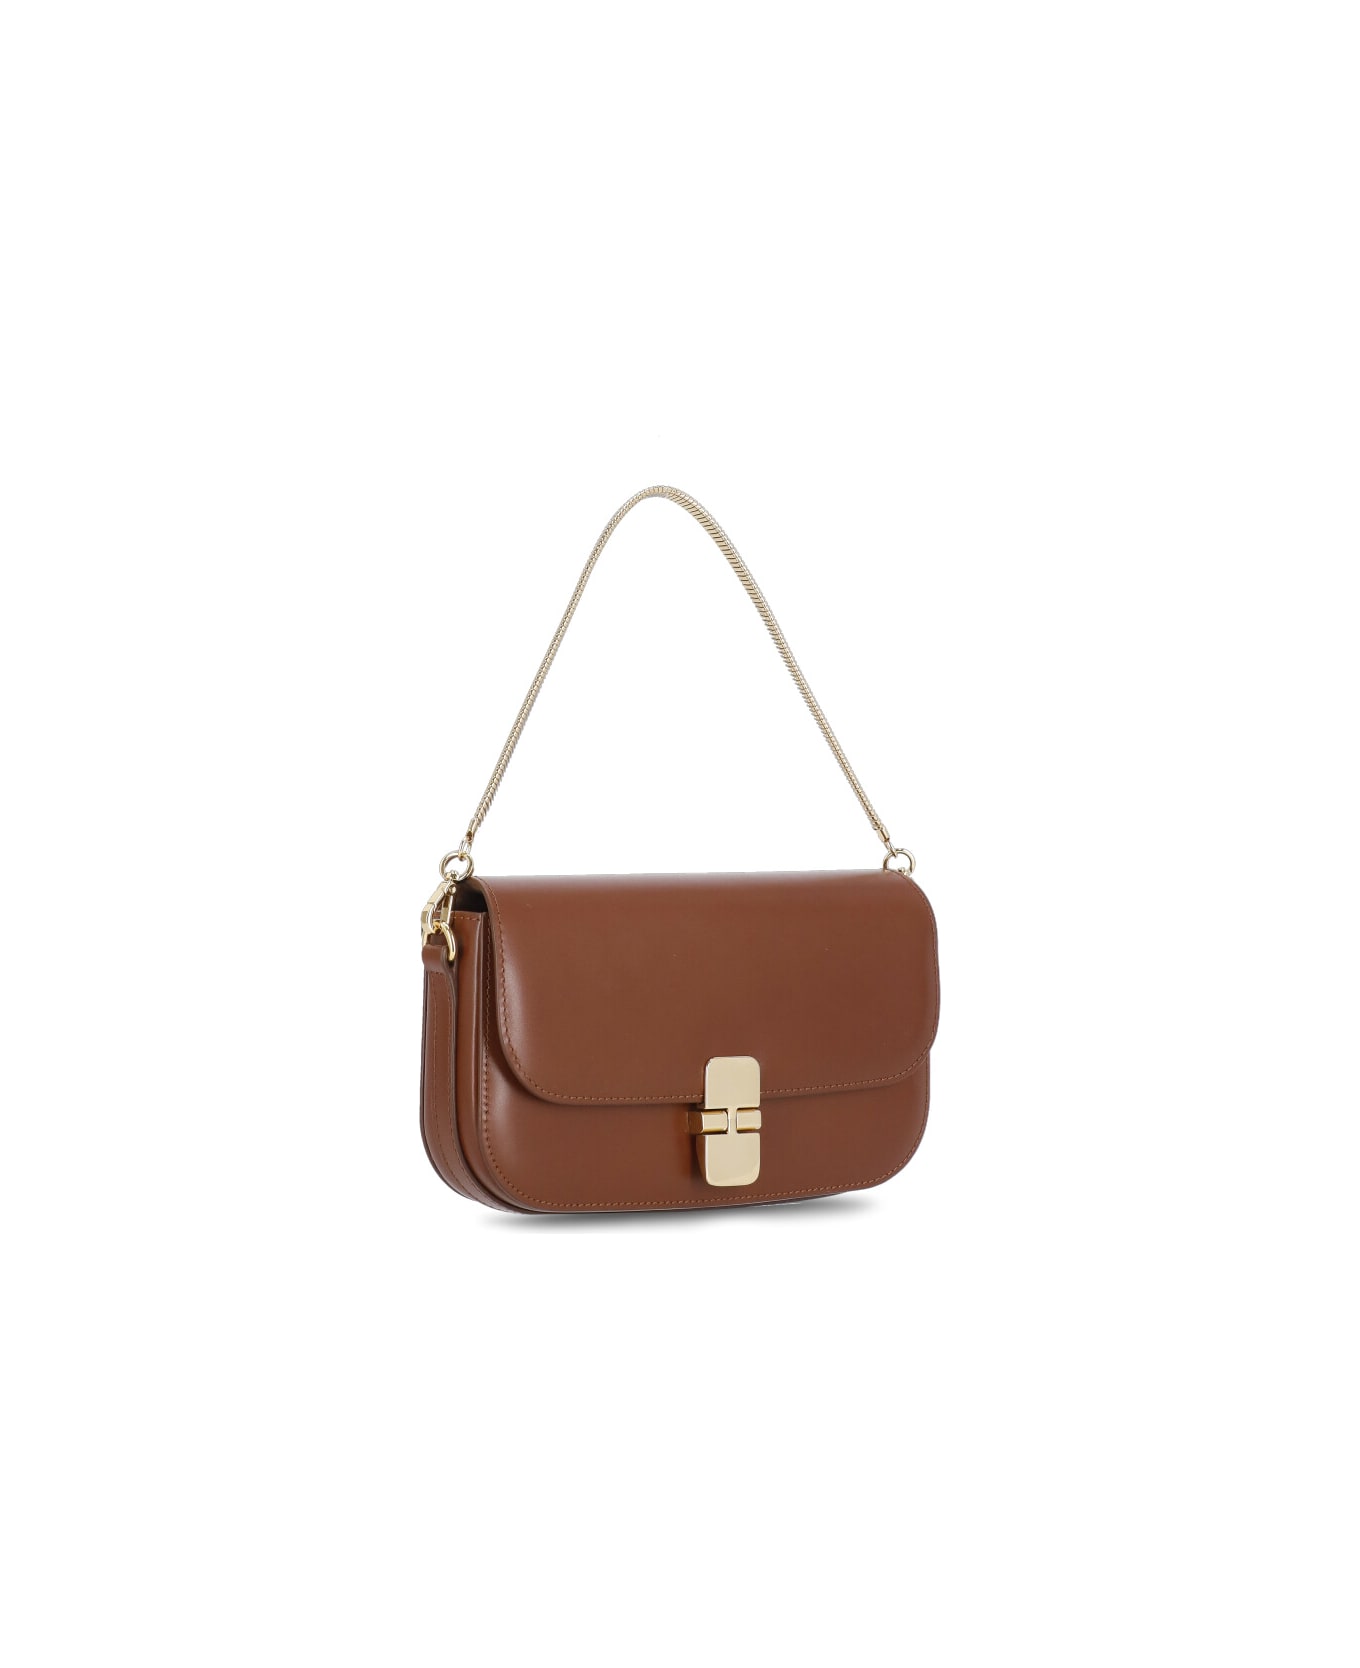 A.P.C. Grace Leather Clutch Bag - Brown ショルダーバッグ